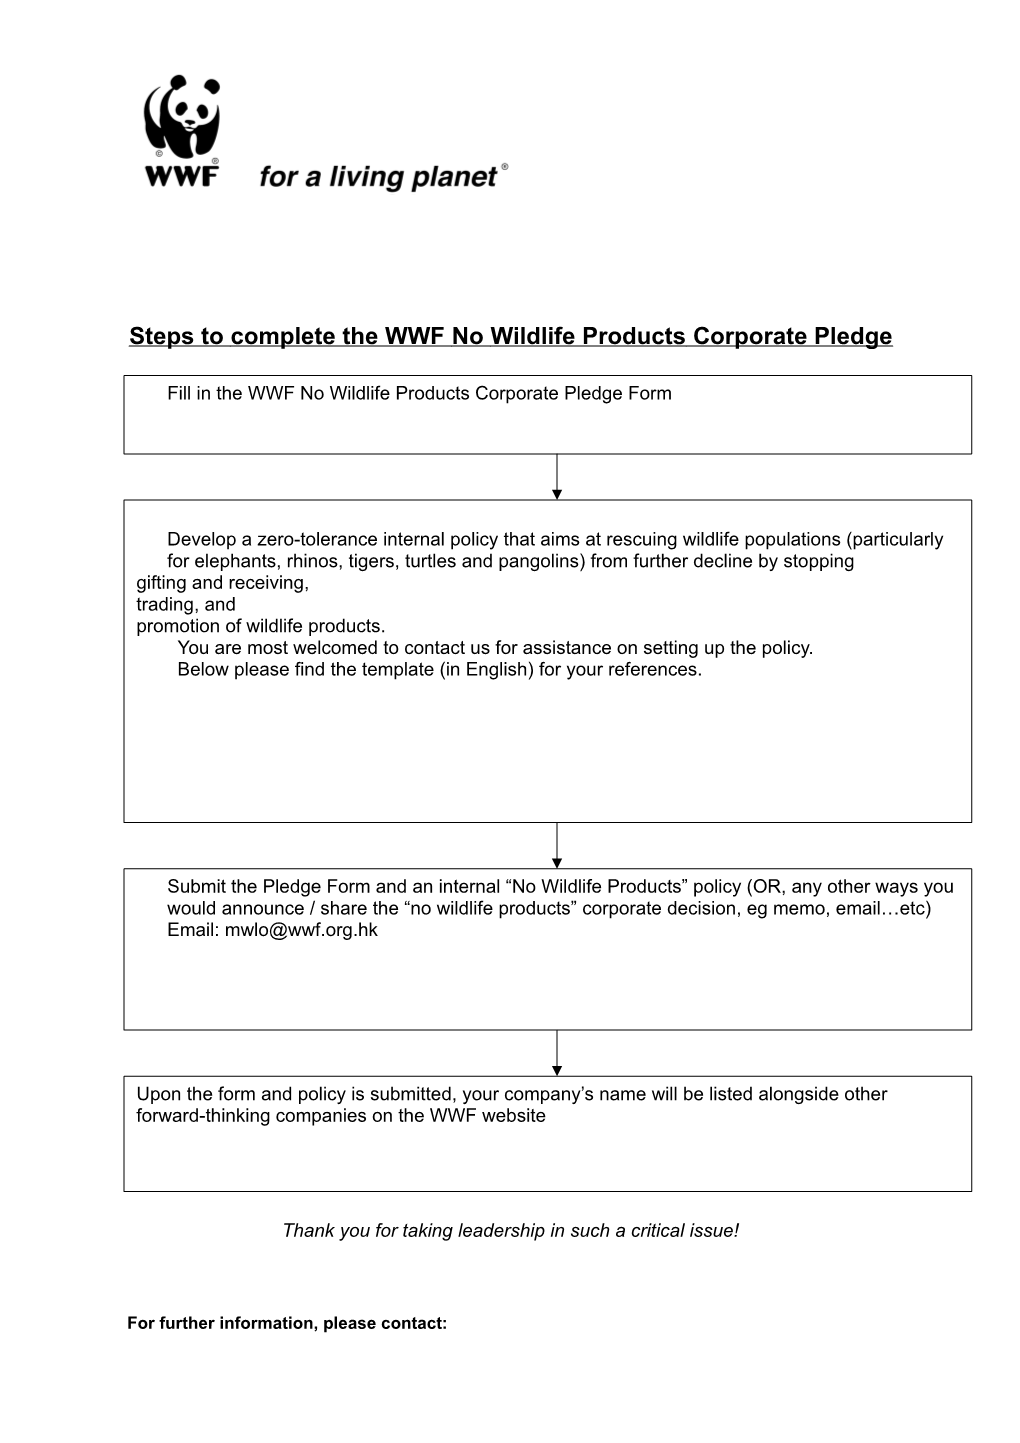 Steps to Complete the WWF No Wildlife Products Corporate Pledge